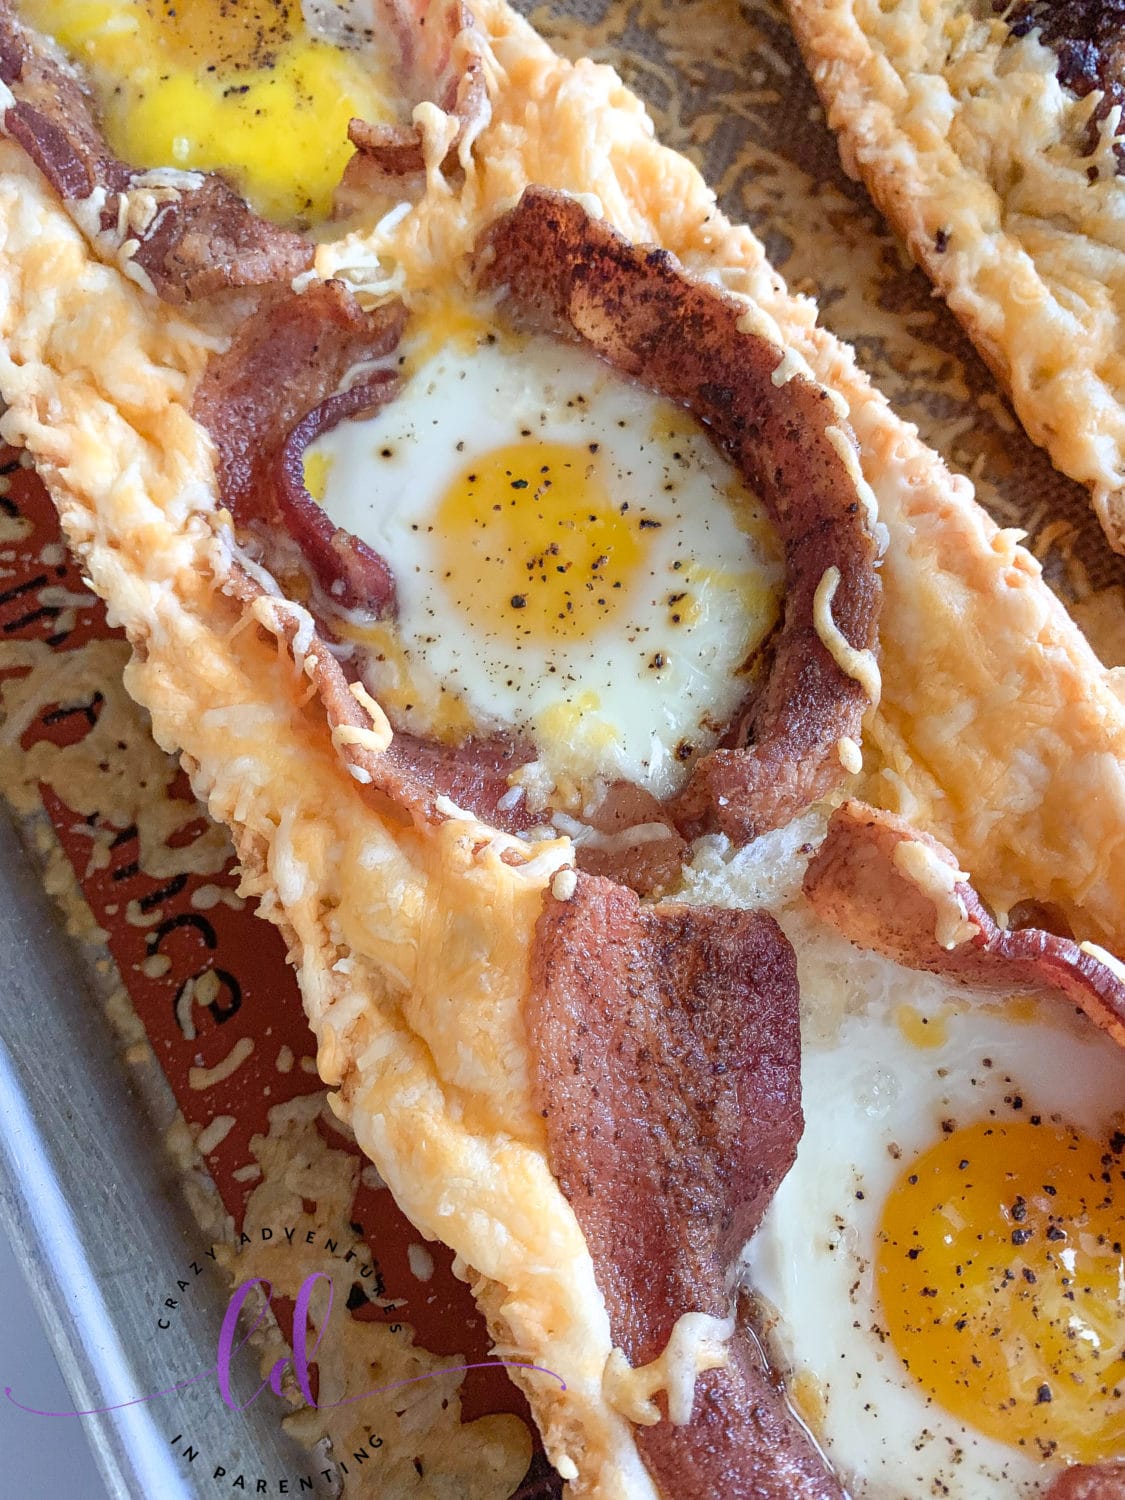 Cooling off the Bacon Cheesy Baked Egg Italian Toast